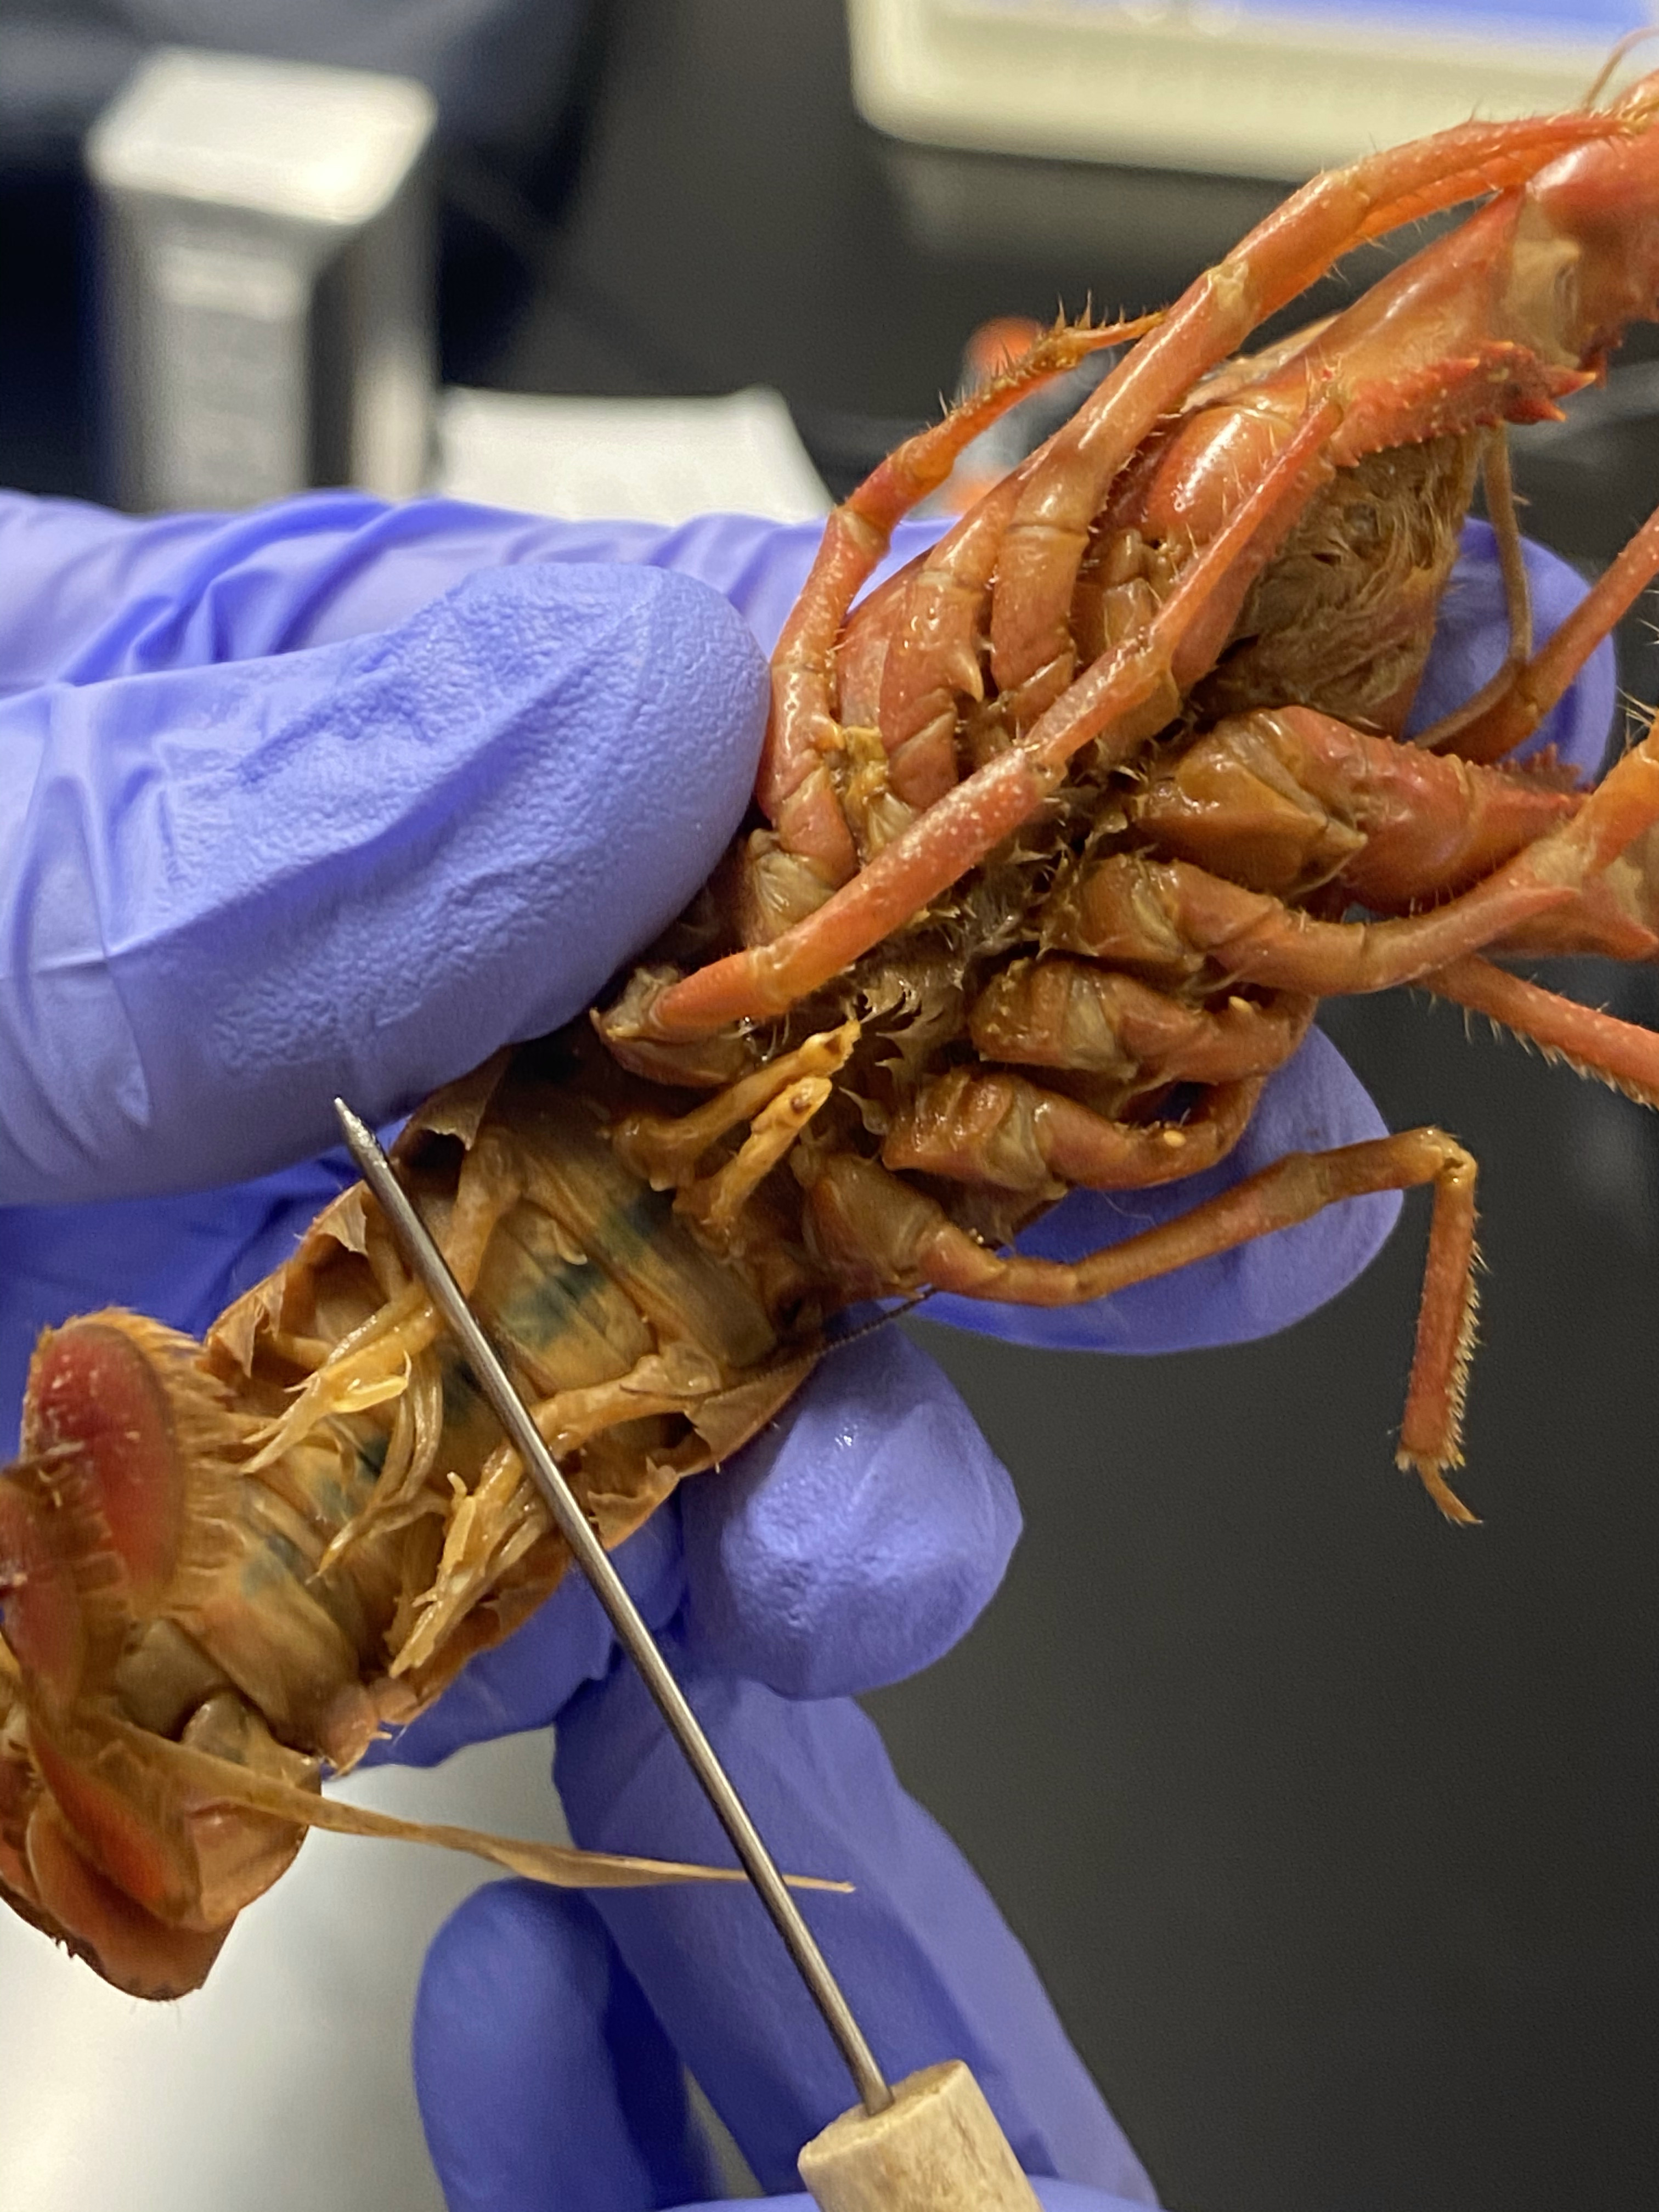 Ventral view of a male crayfish.